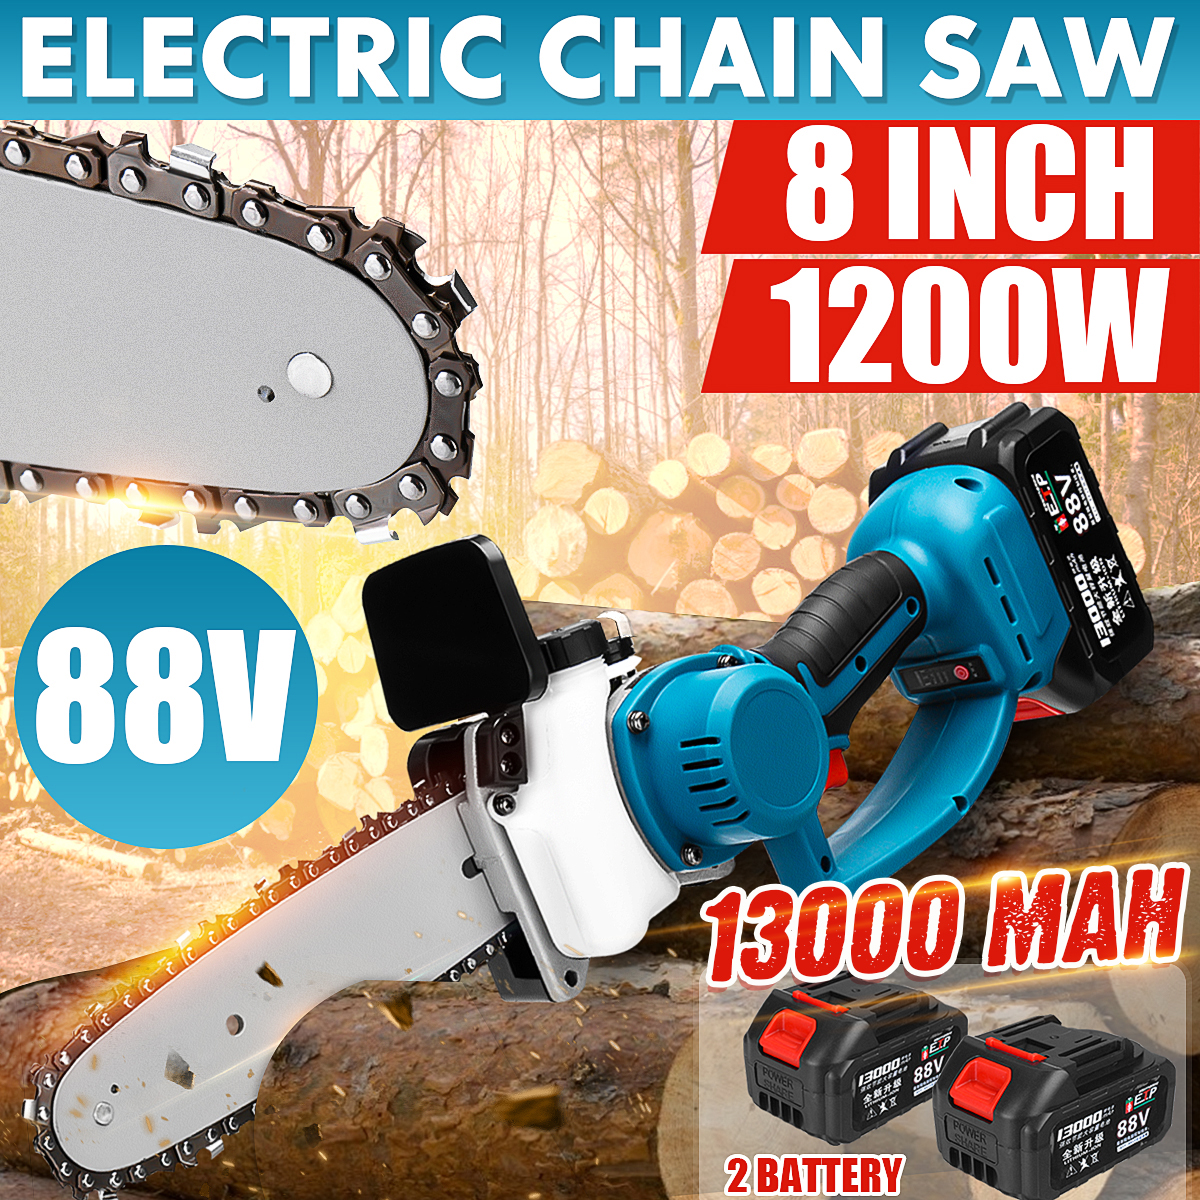 88V-1200W-Electric-Cordless-Chain-Saw-Woodworking-Wood-Cutter-with-2-Batteries-Kit-1788786-1